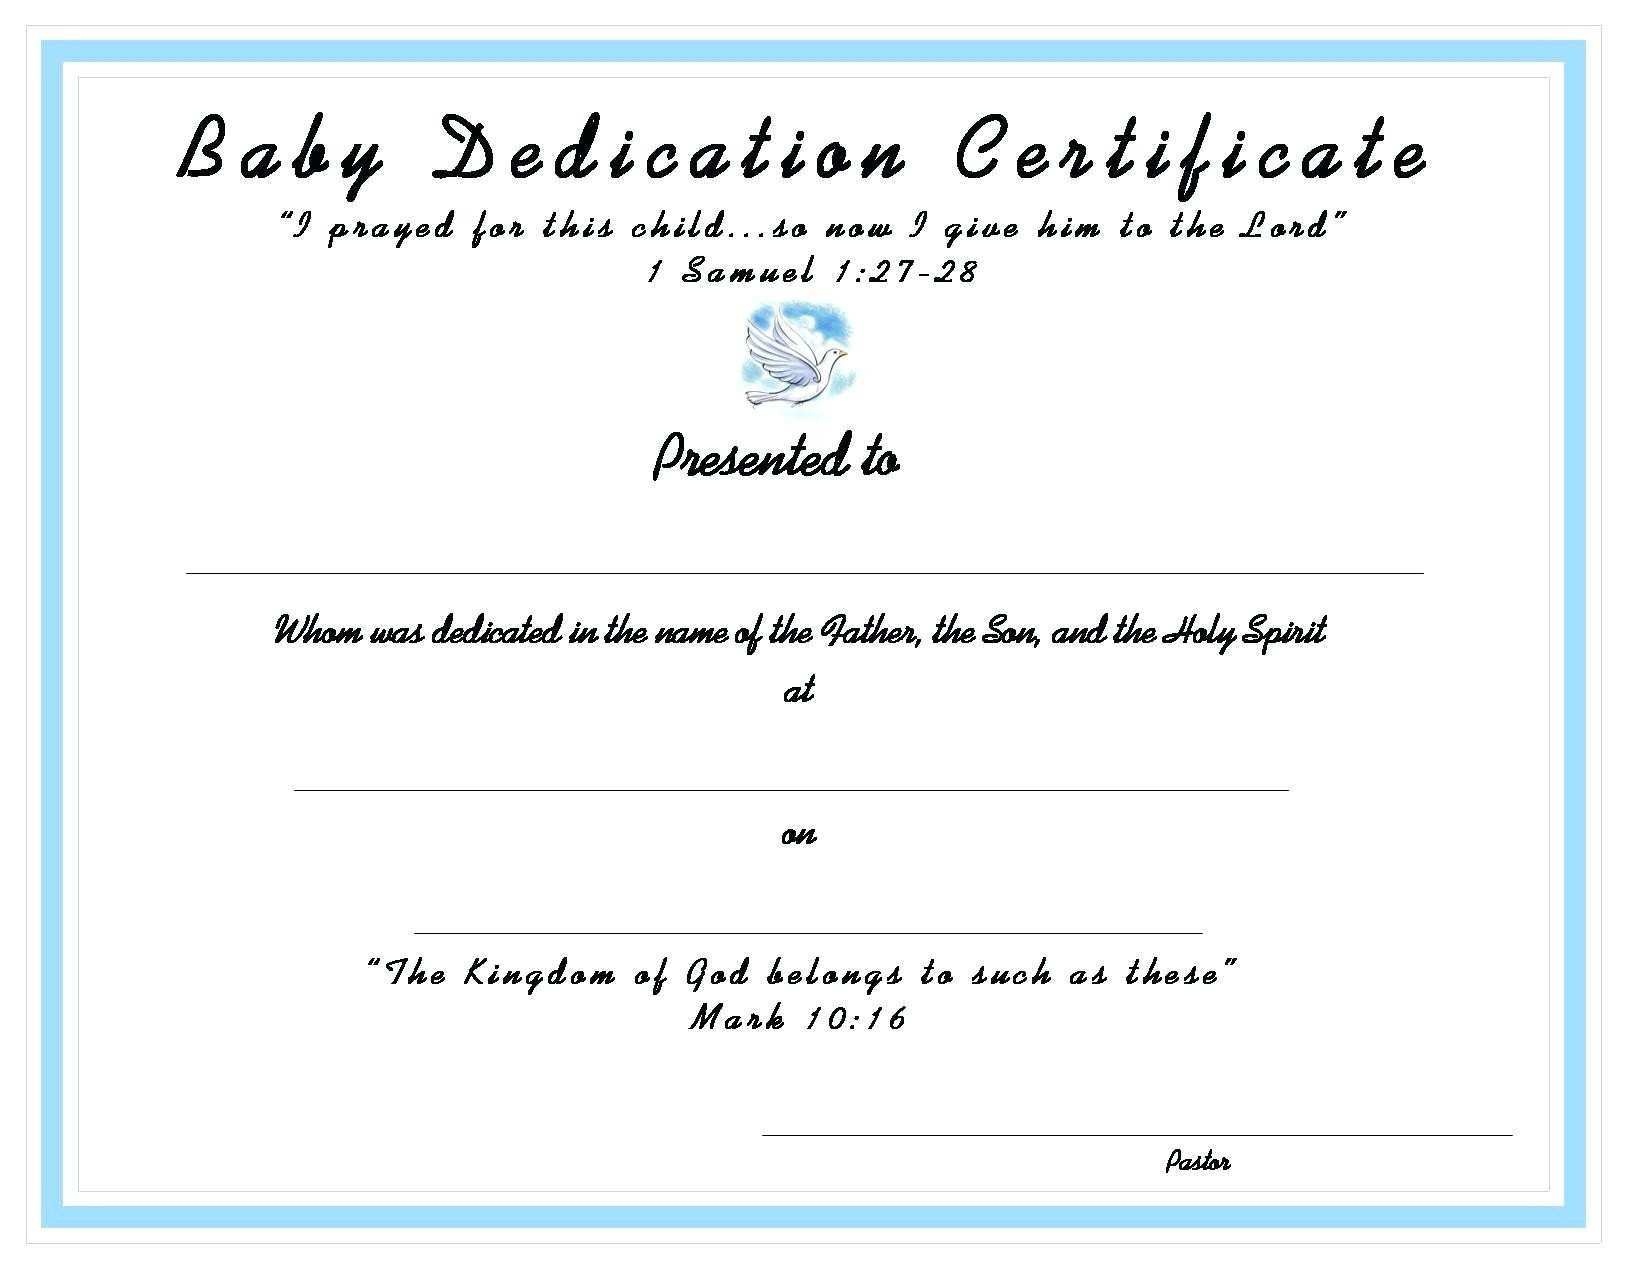 Baptism Certificate Template Word Free | Certificatetemplateword - Free Online Printable Baptism Certificates